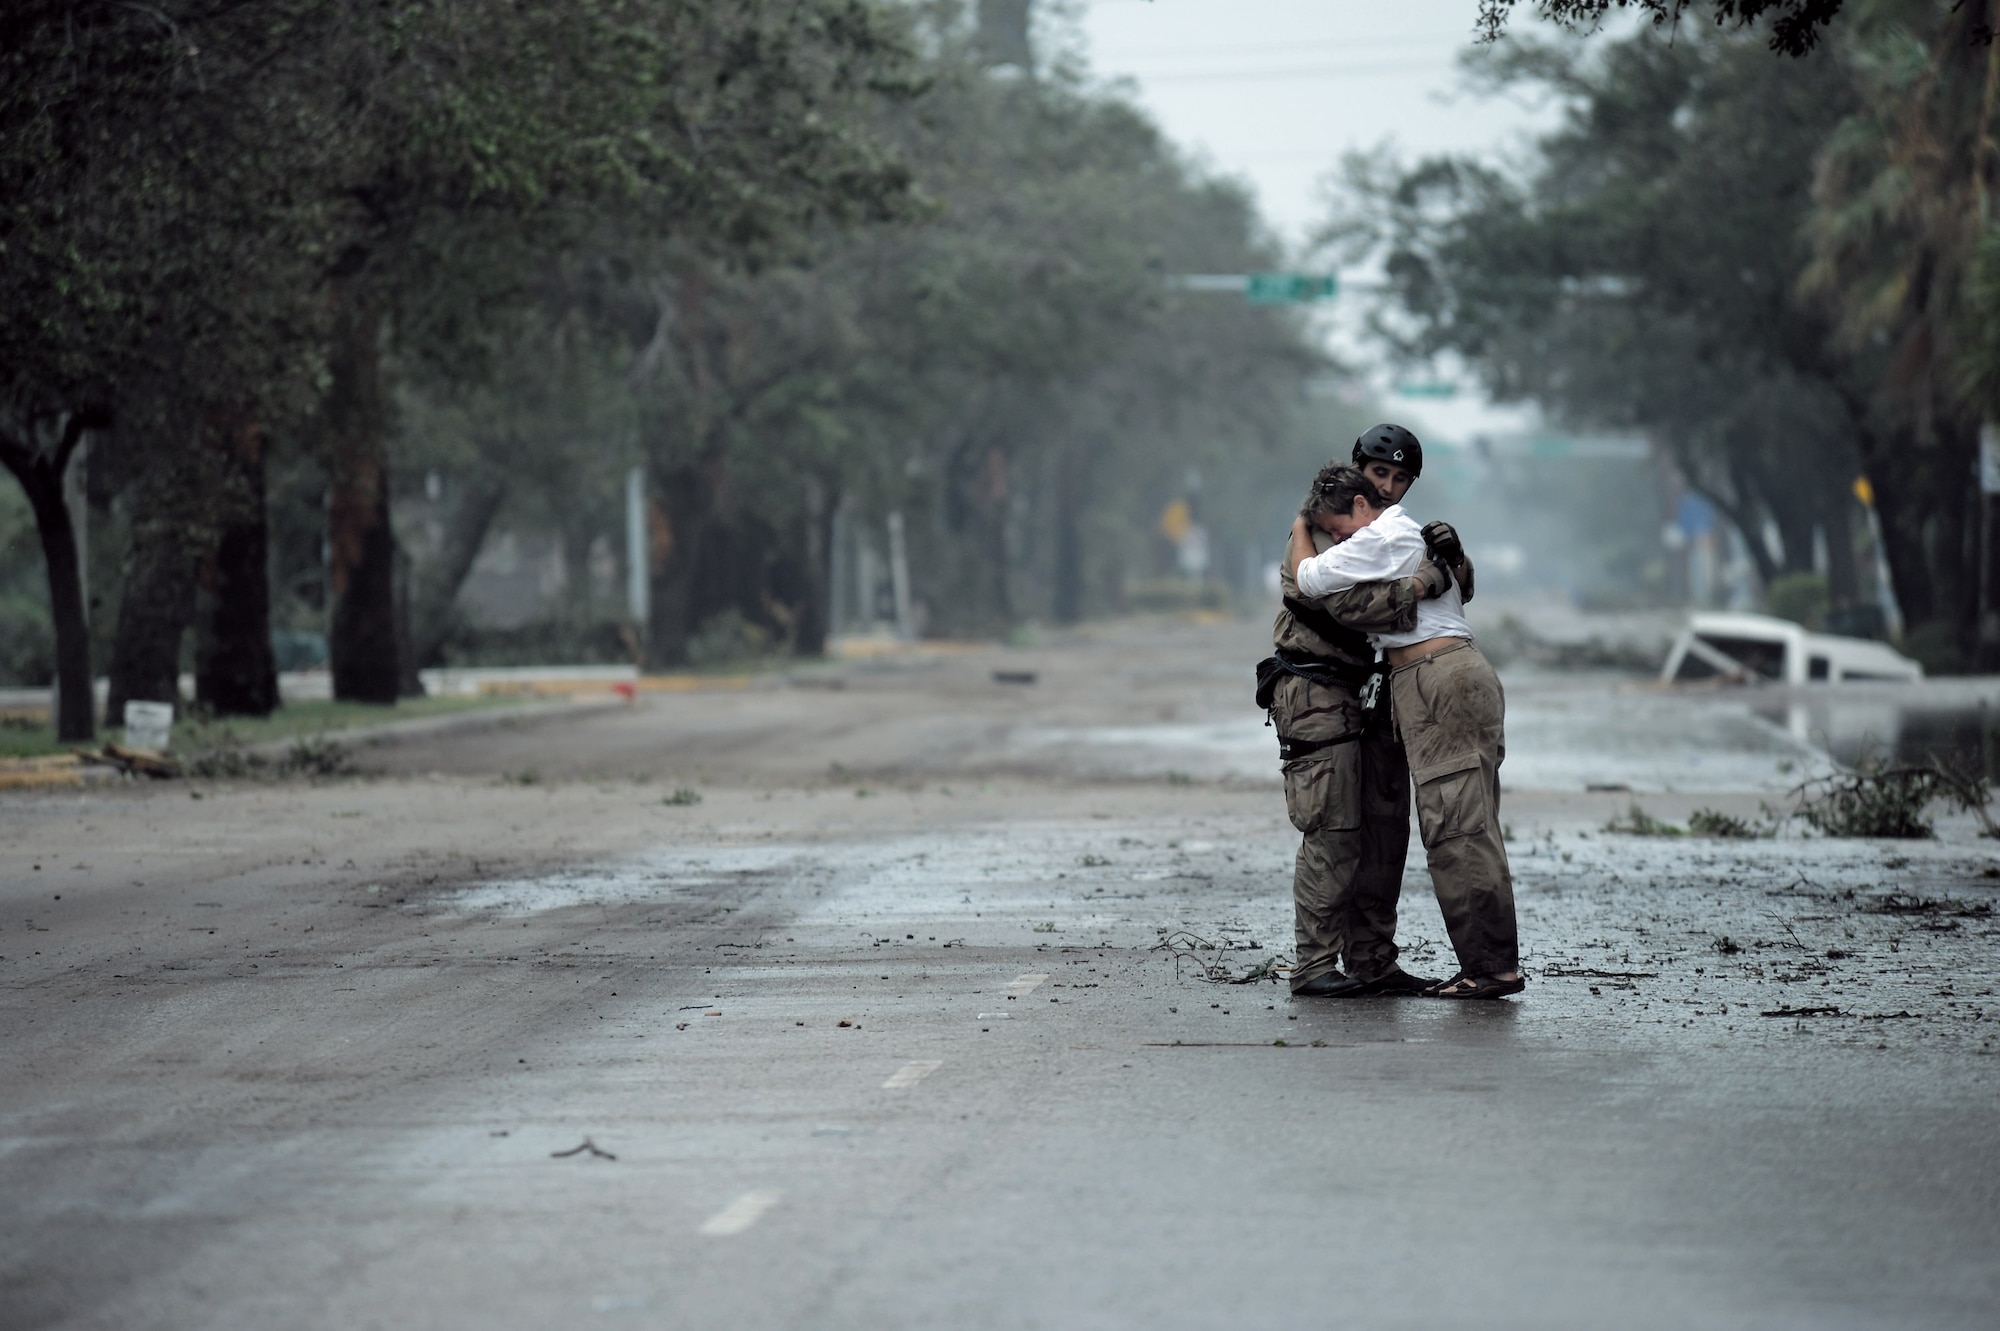 Pararescueman Staff Sgt. Lopaka Mounts receives a hug from a resident during search and rescue operations after Hurricane Ike, Sept. 13. Sergeant Mounts assigned to the 331st Air Expeditionary Group at Randolph Air Force Base, Texas. (U.S. Air Force photo/Staff Sgt. James L. Harper Jr.) 